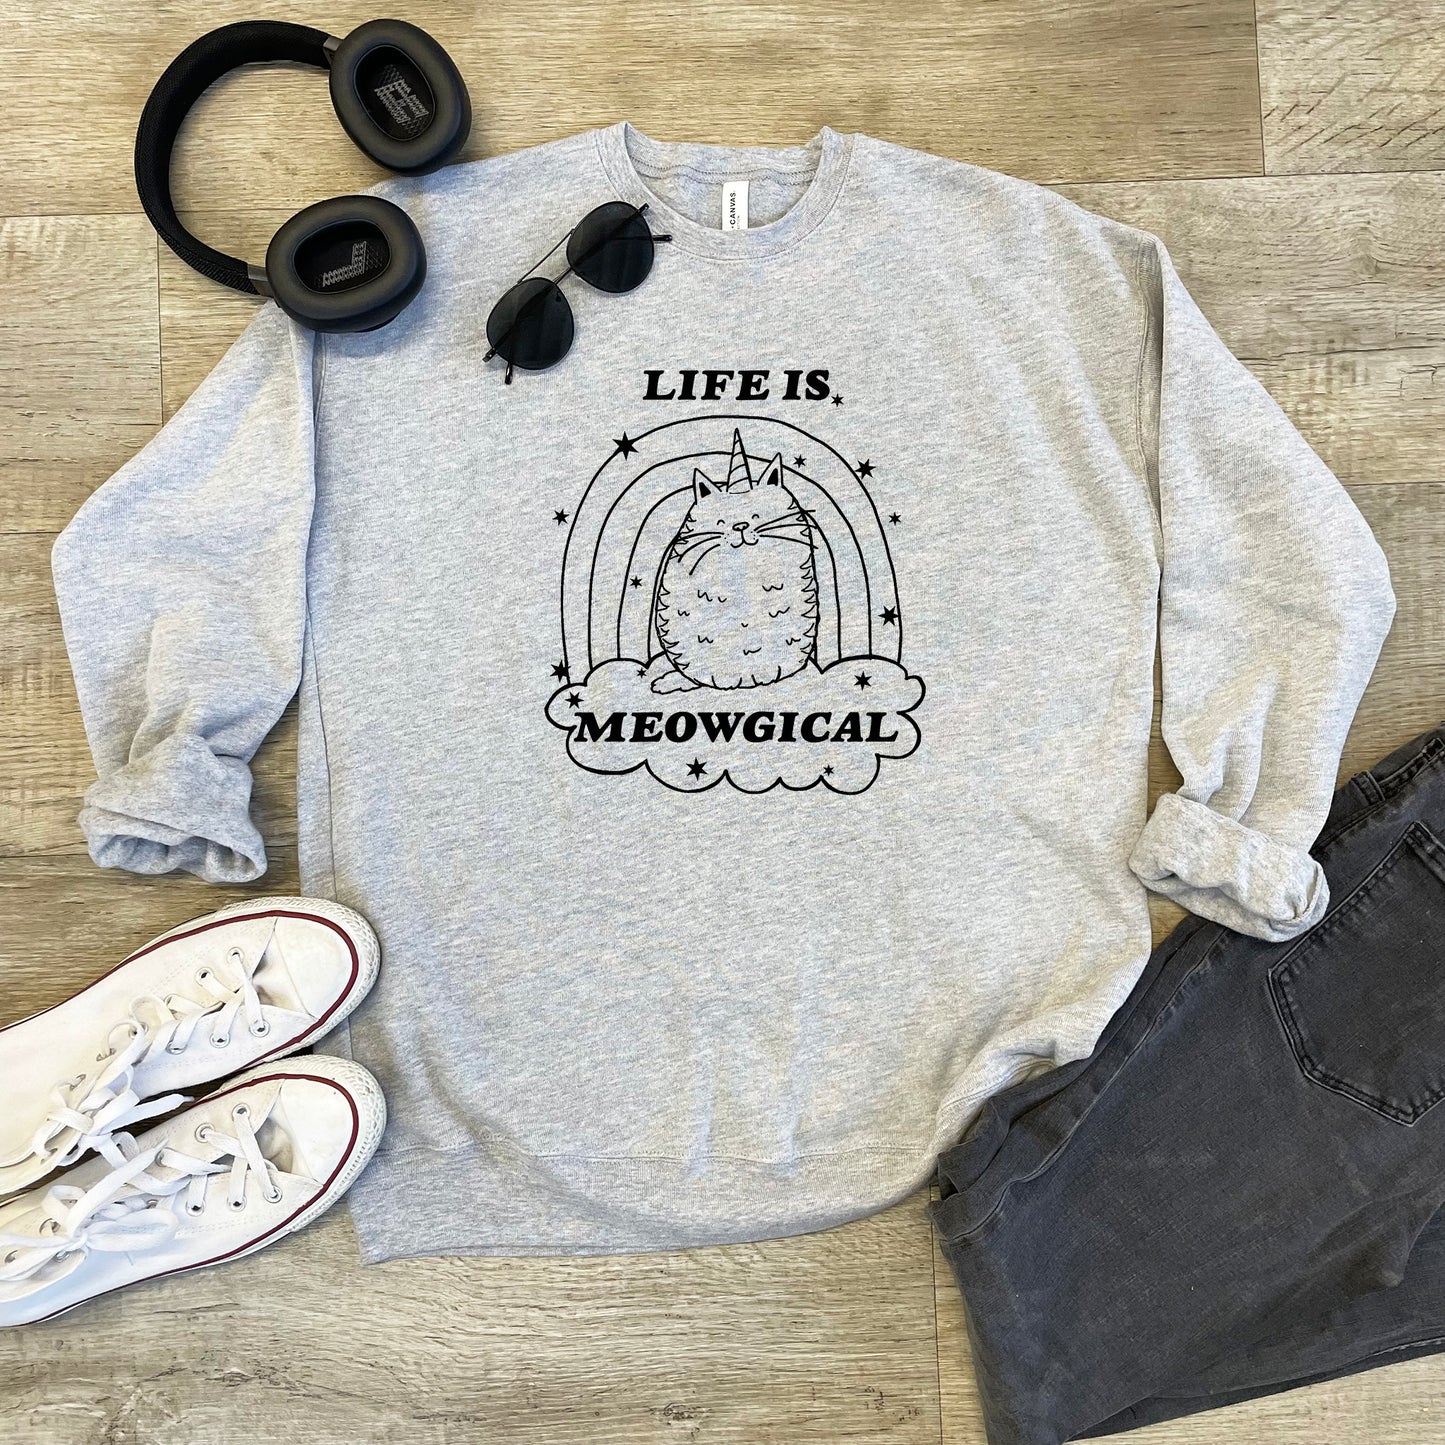 Life Is Meowgical (Cat) - Unisex Sweatshirt - Heather Gray or Dusty Blue